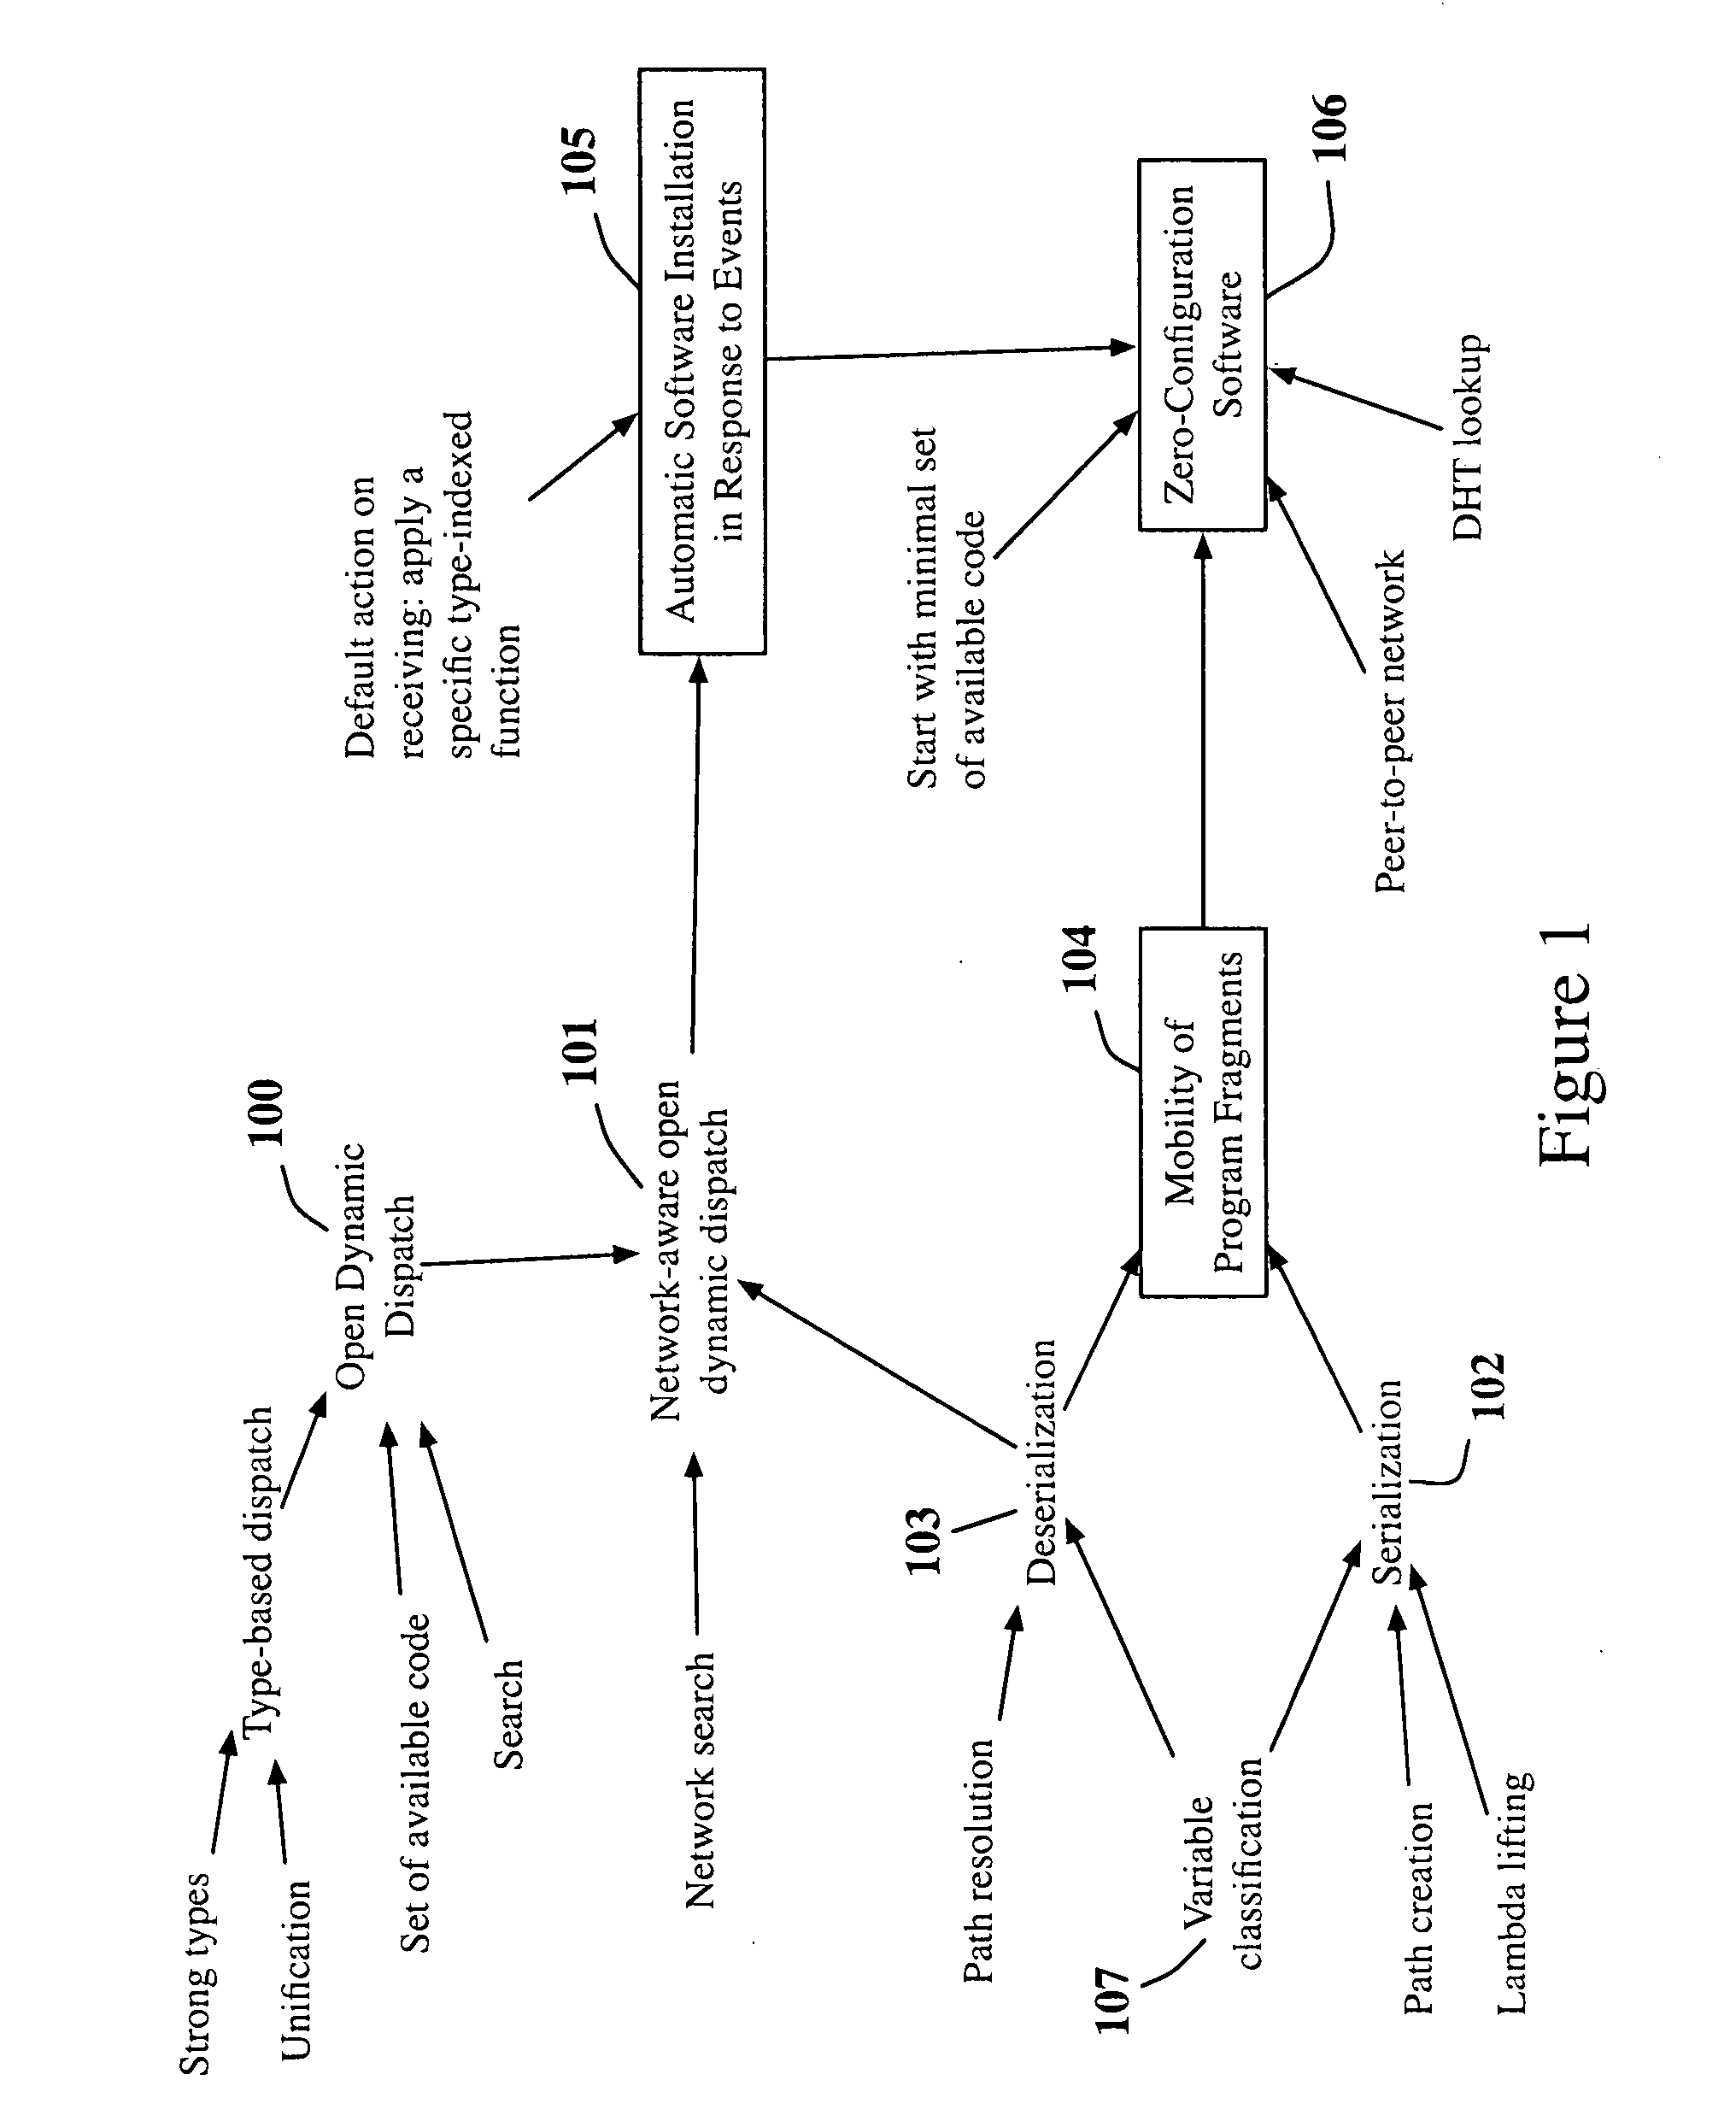 Circuits and methods for mobility of effectful program fragments